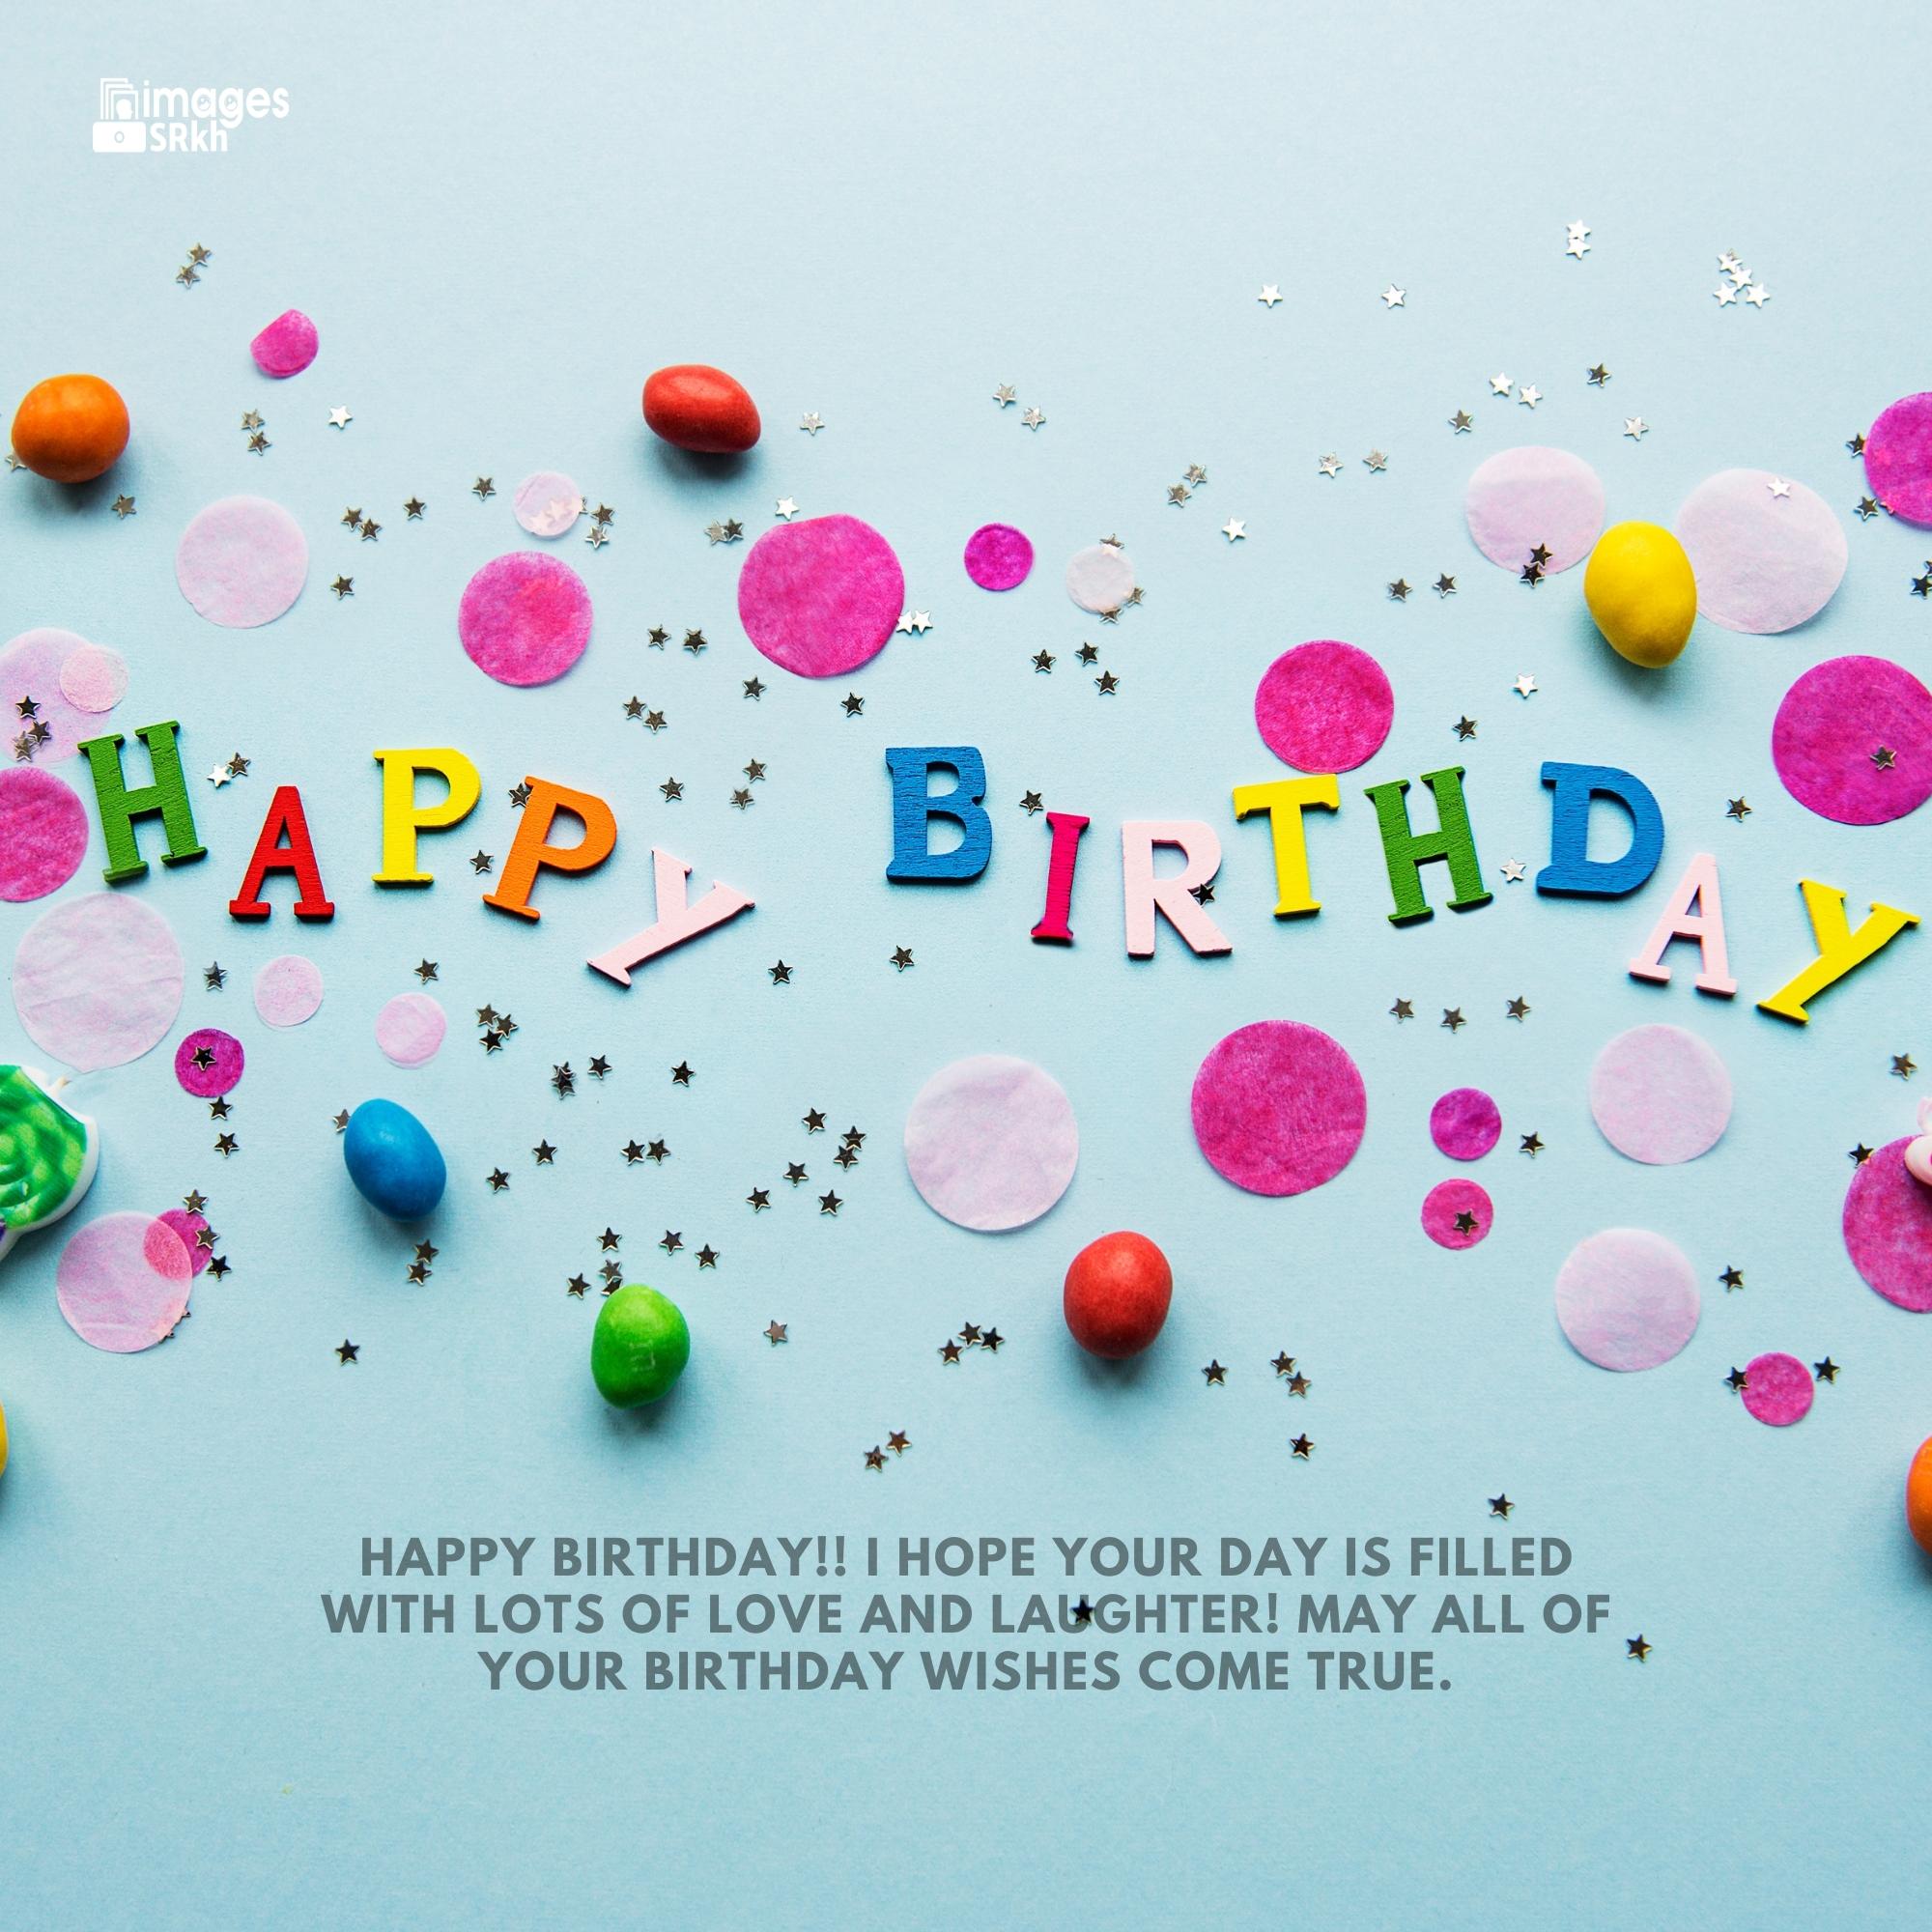 Happy Birthday Images With Quotation Hd